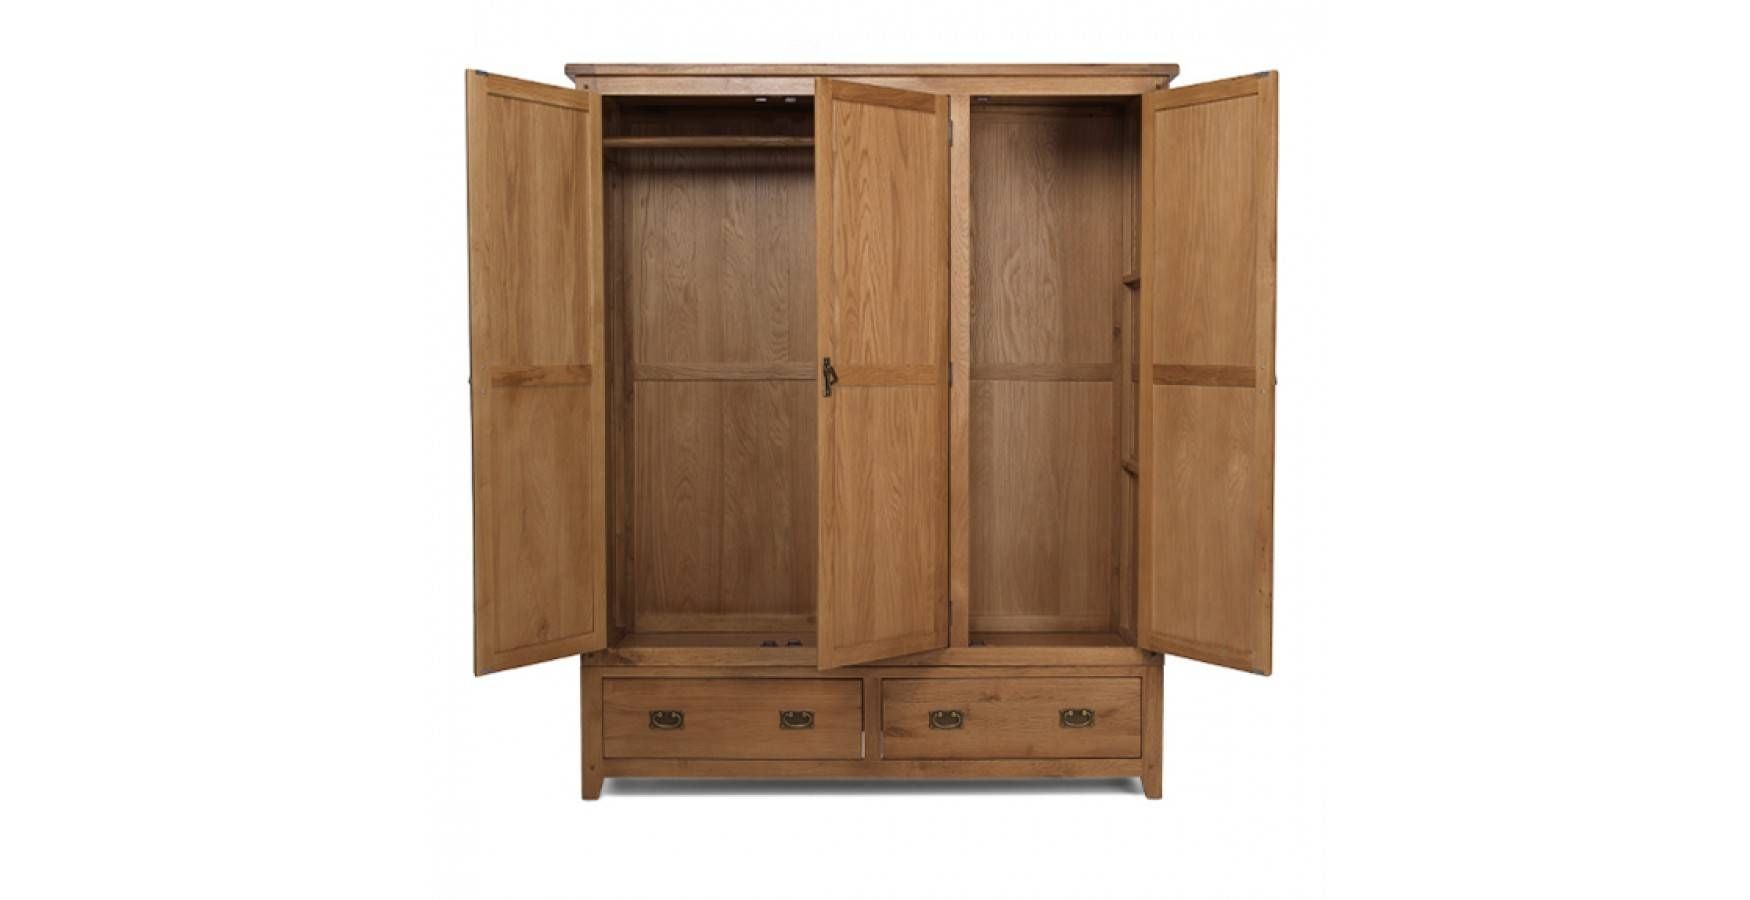 Rustic Oak Triple Wardrobe With Drawers – Lifestyle Furniture Uk Regarding Wardrobe With Shelves And Drawers (View 27 of 30)